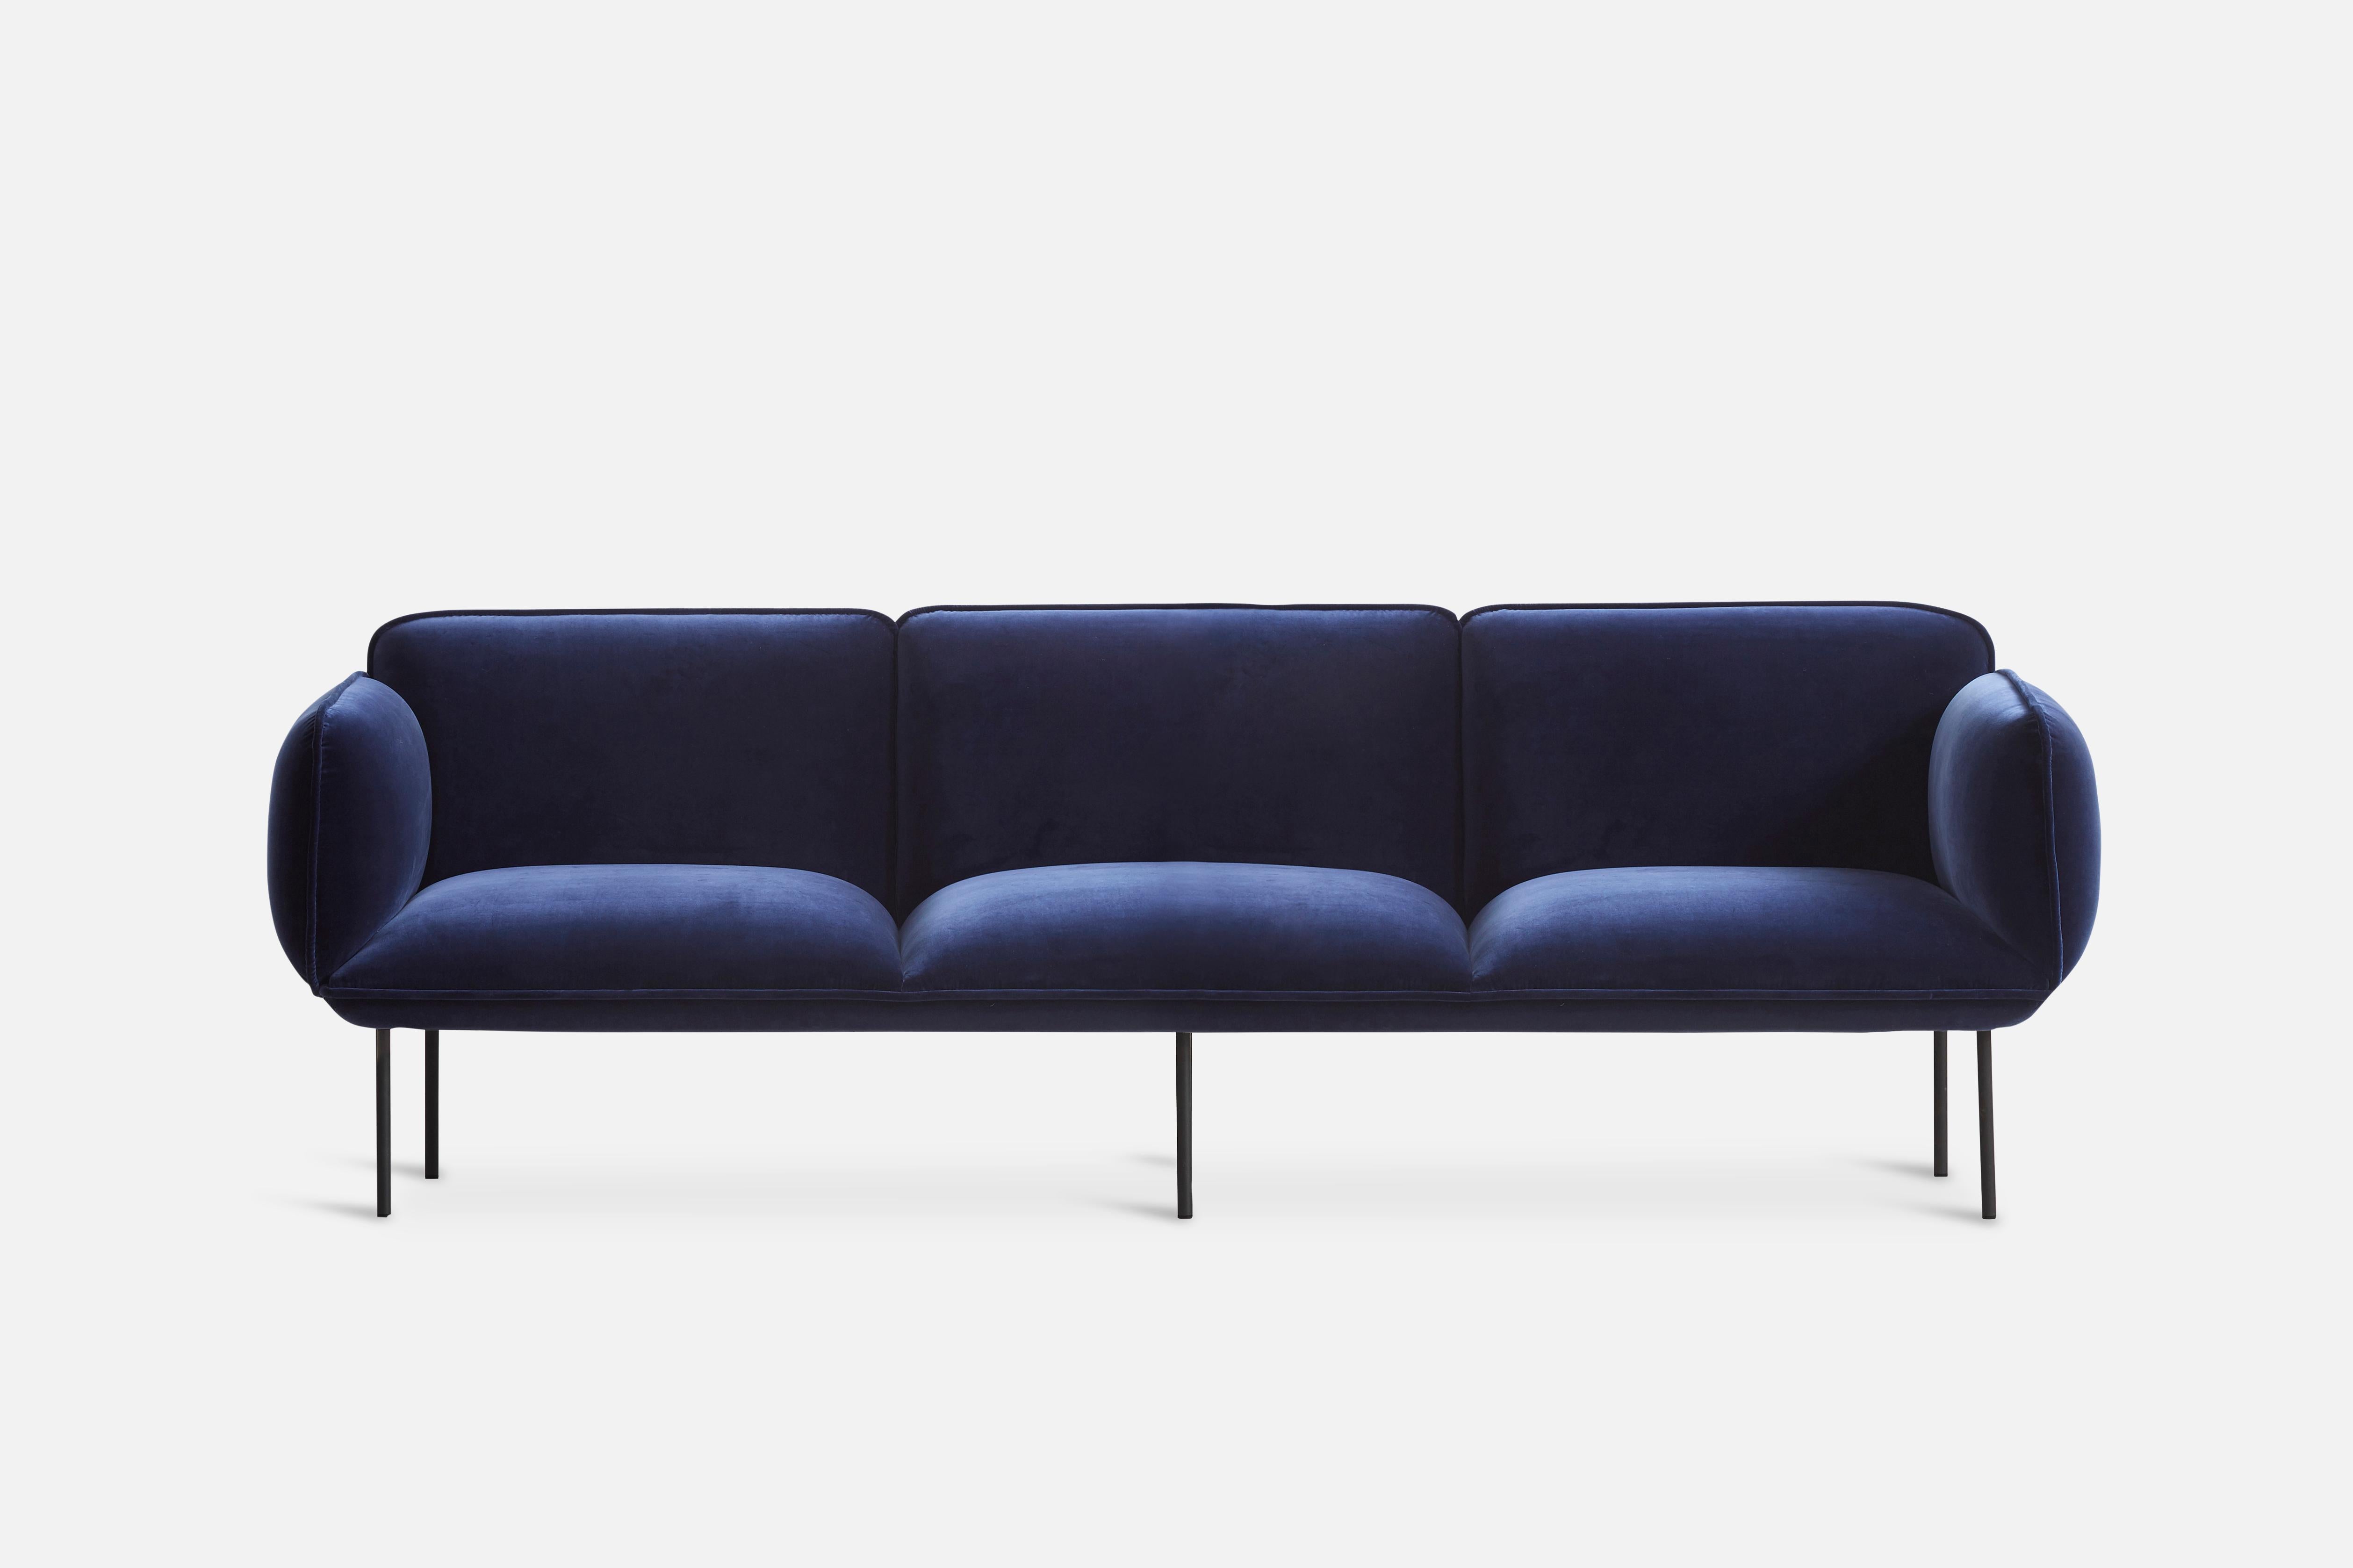 Nakki seater 3 by Mika Tolvanen.
Materials: Foam, plywood, elastic belts, memory foam, fabric (Harald 3, 0182).
Dimensions: D 78 x W 245 x H 83 cm.
Also available in different colours and materials.

The founders, Mia and Torben Koed, decided